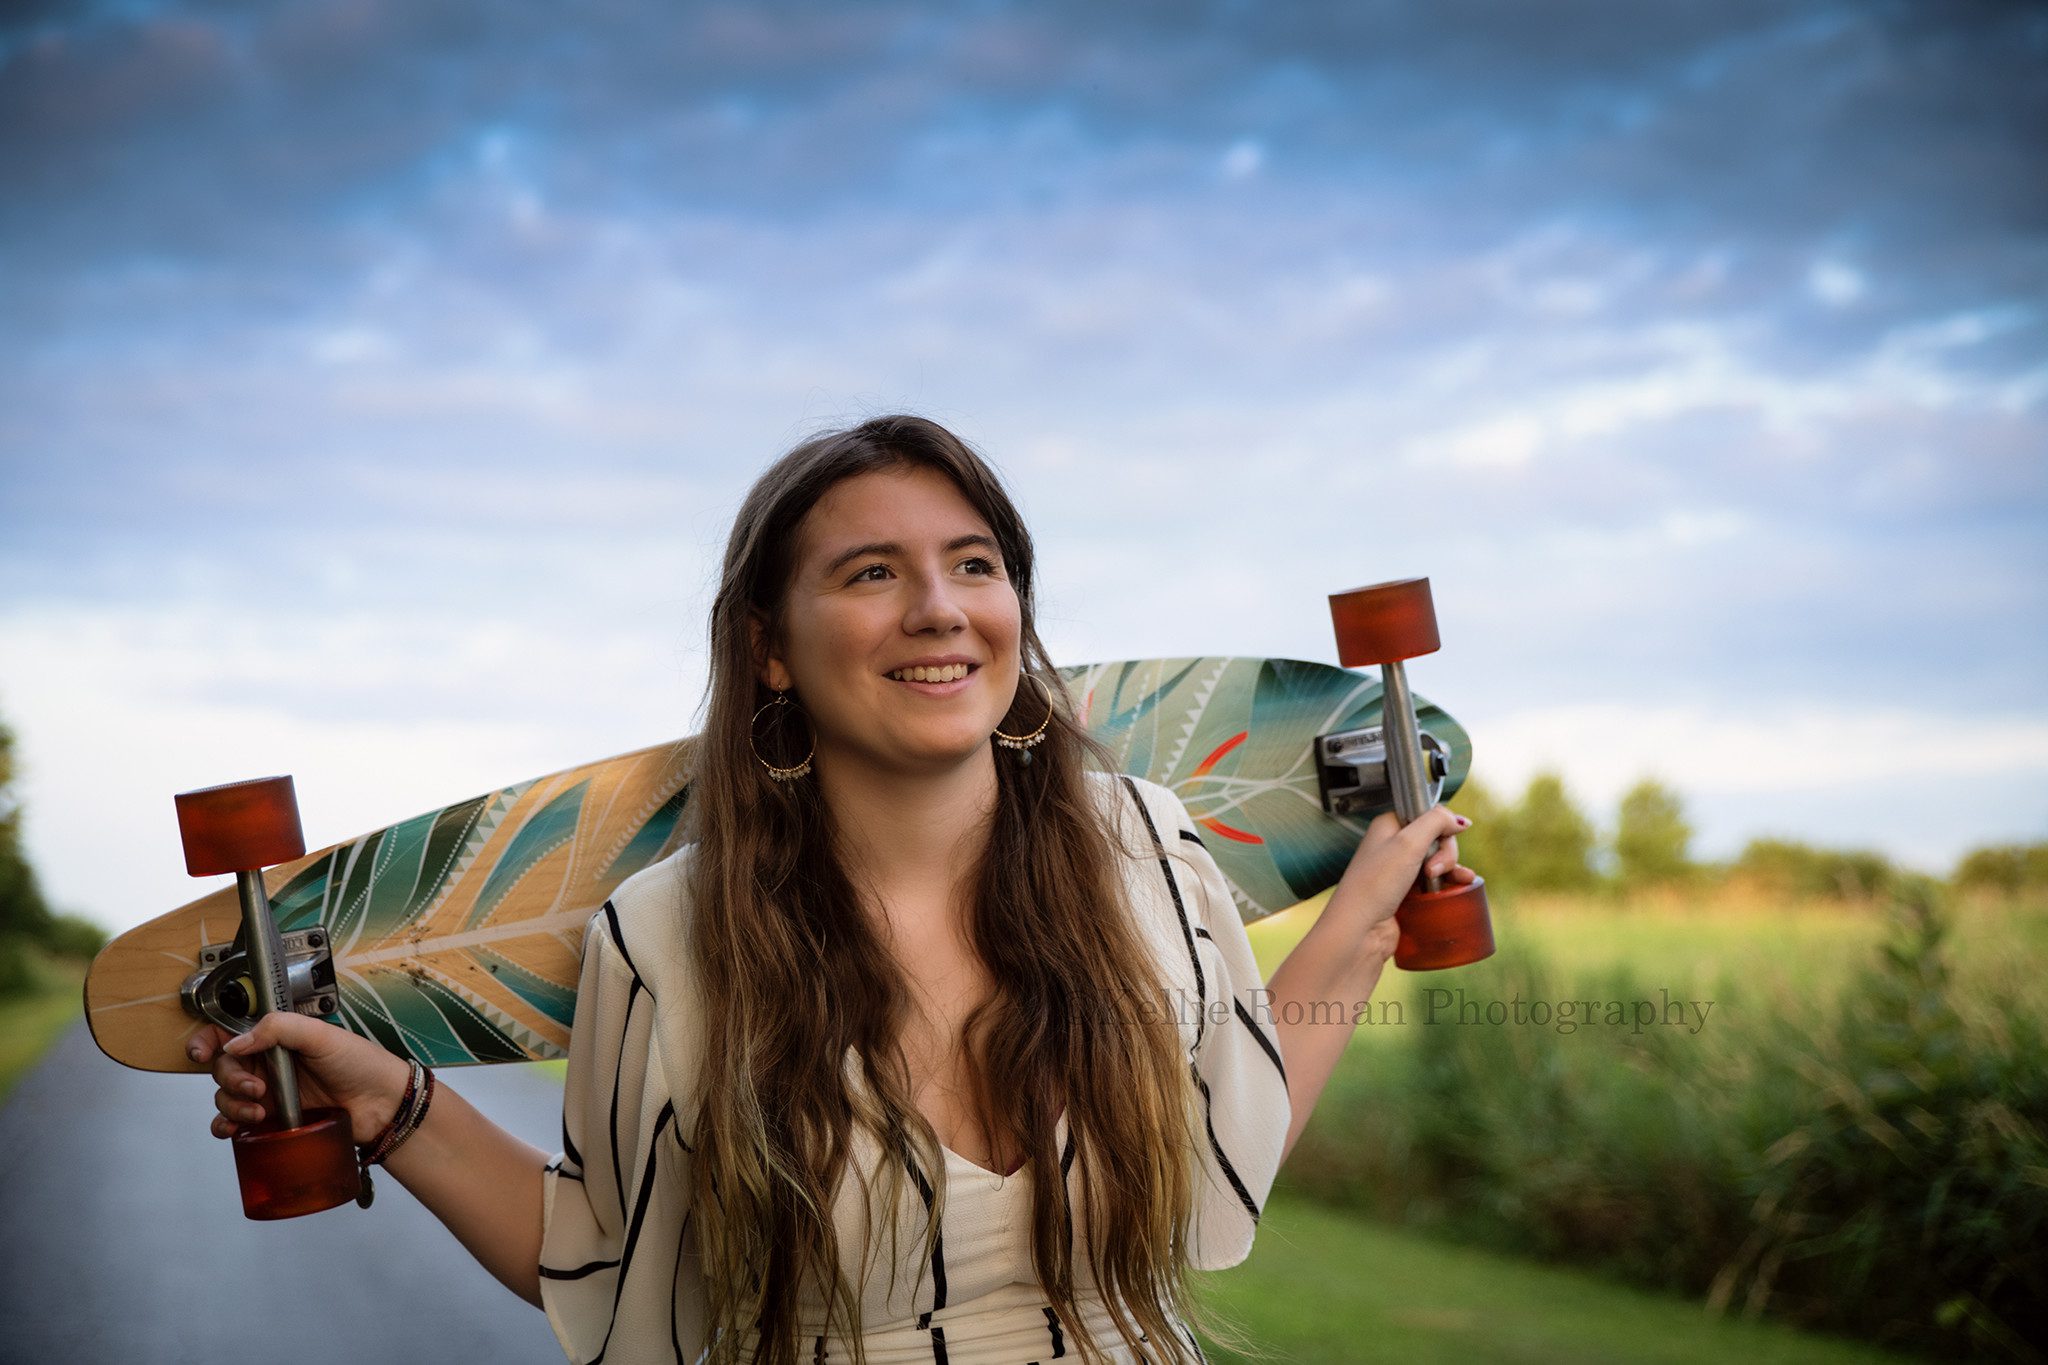 boho inspired a teenage girl with very long hair standing on a black driveway she is looking up and off to the side smiling and is holding a colorful skateboard behind her shoulders she has on a white long romper with black stripes